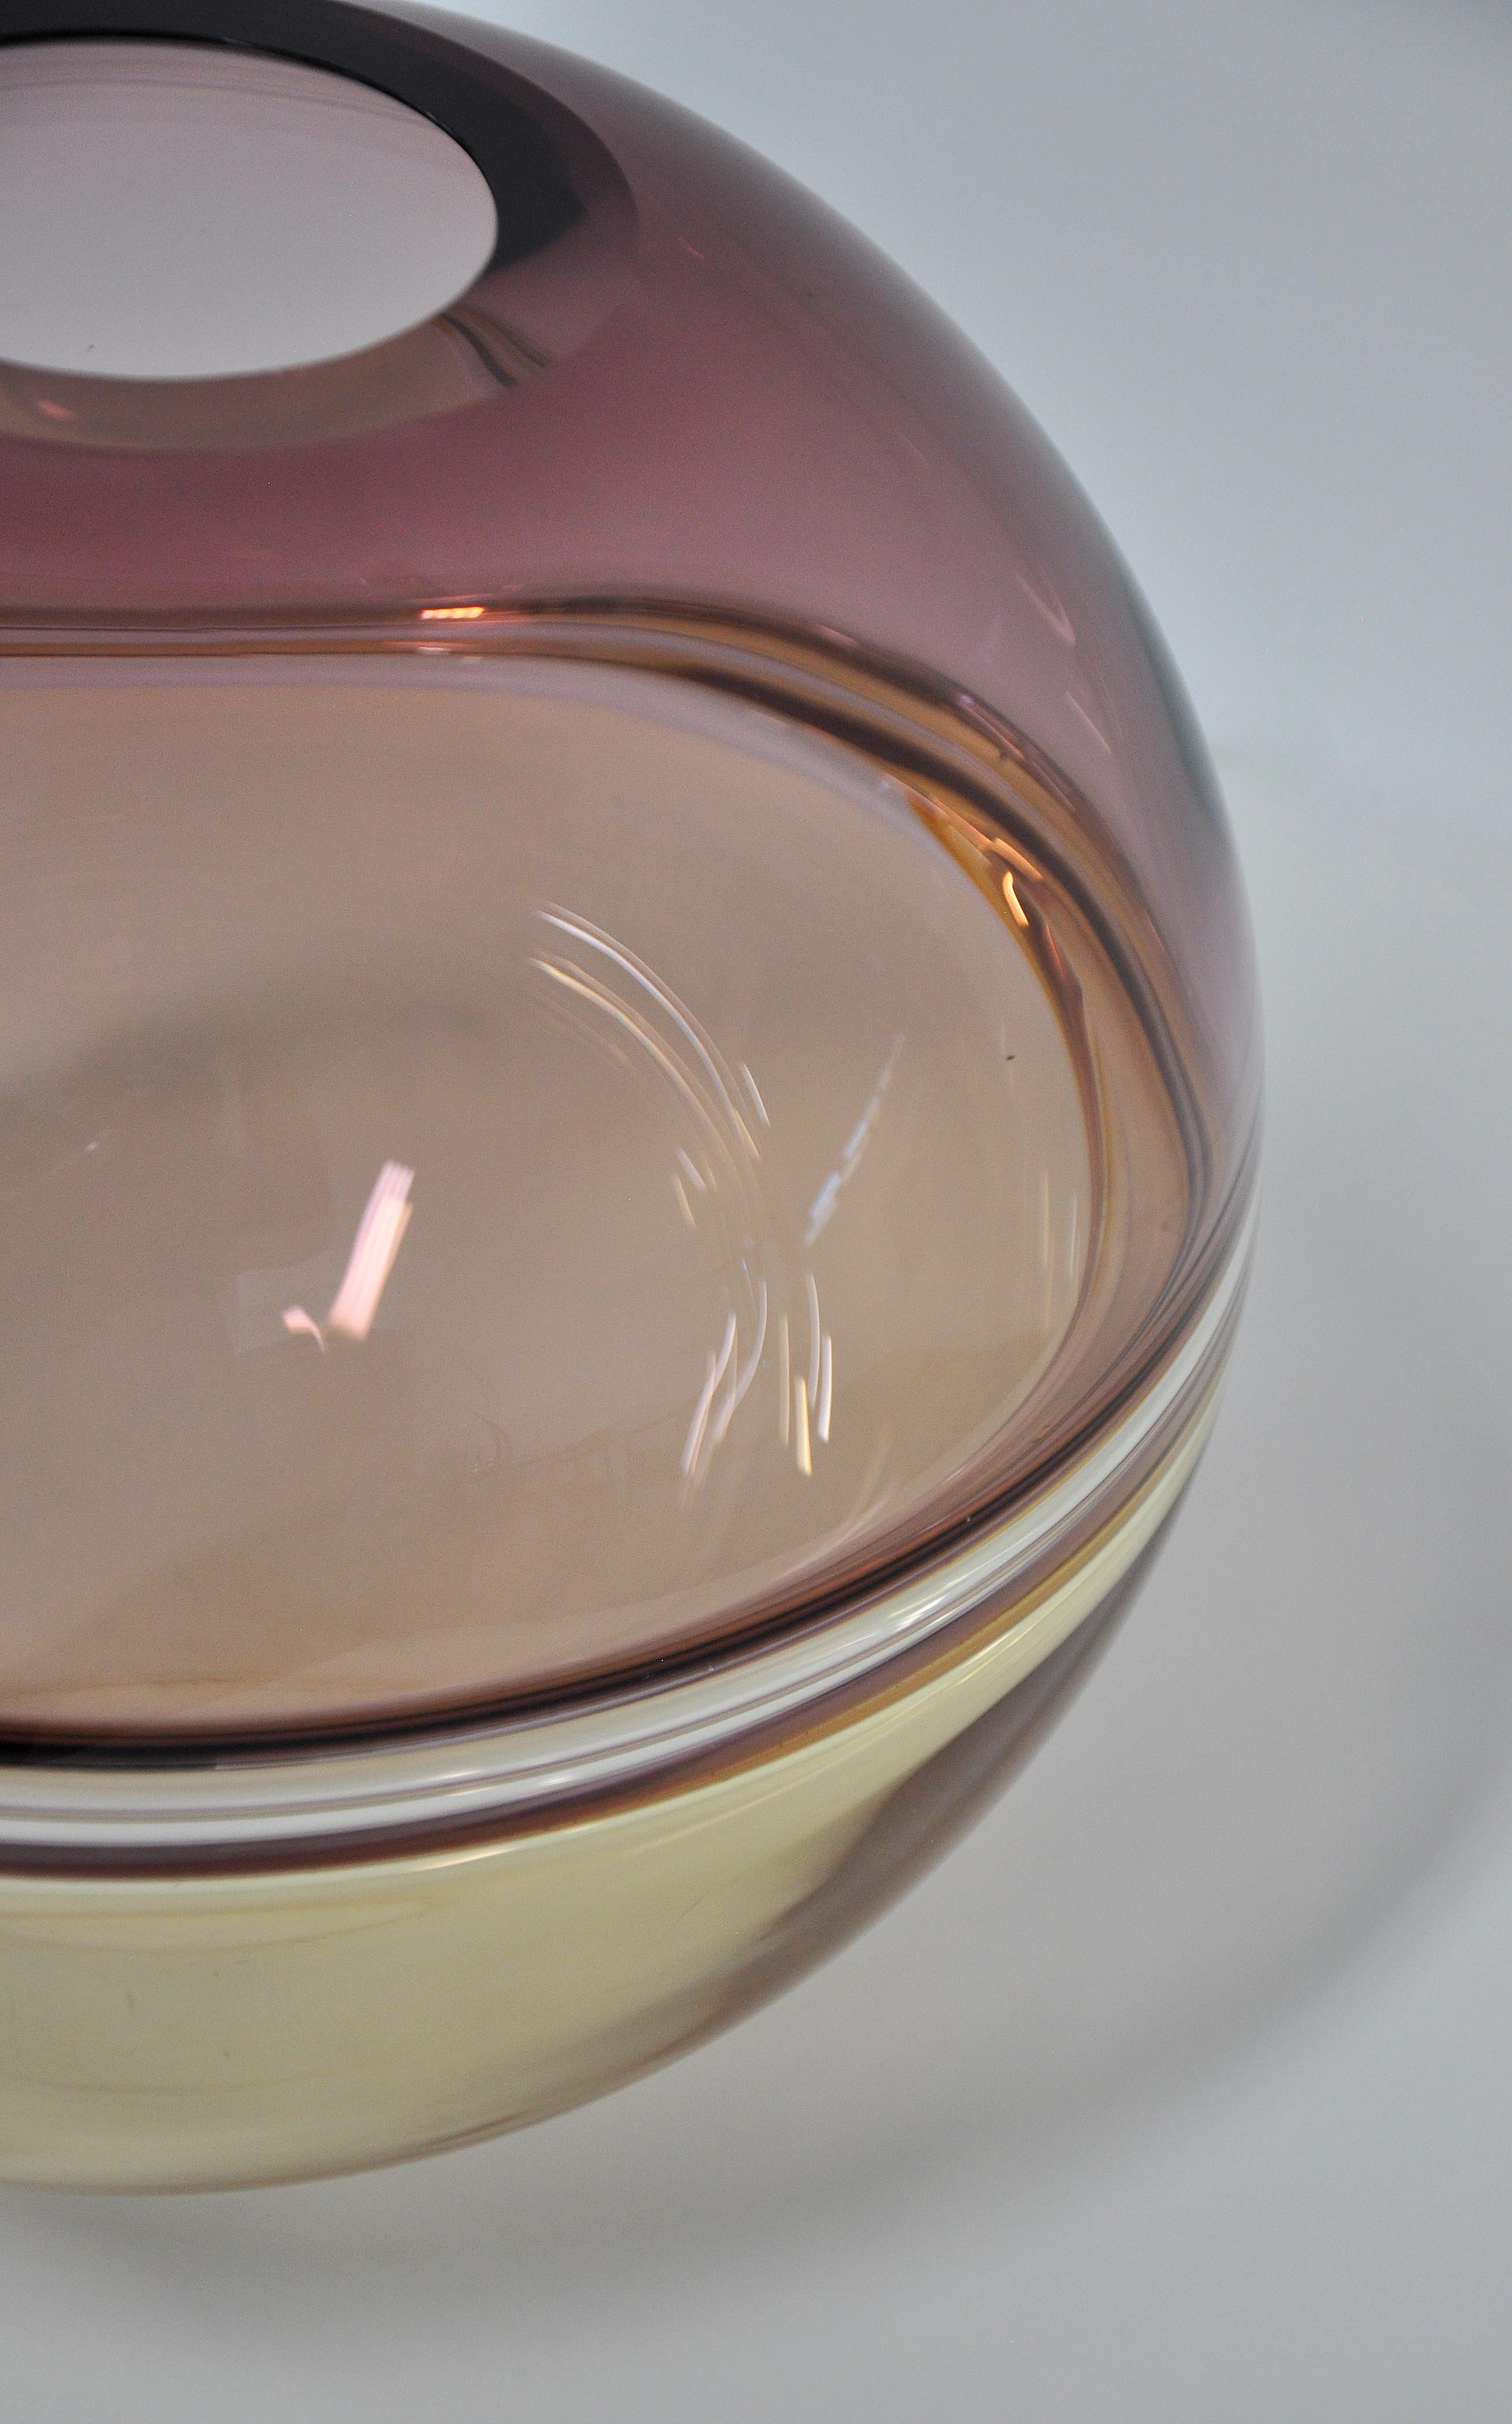 Rare Italian midcentury modern art glass round vase designed by Alfredo Barbini, dating from the 1960s. The large light purple pink or pale lilac and light honey or buttercream yellow spherical vase masterfully executed with the incalmo technique in